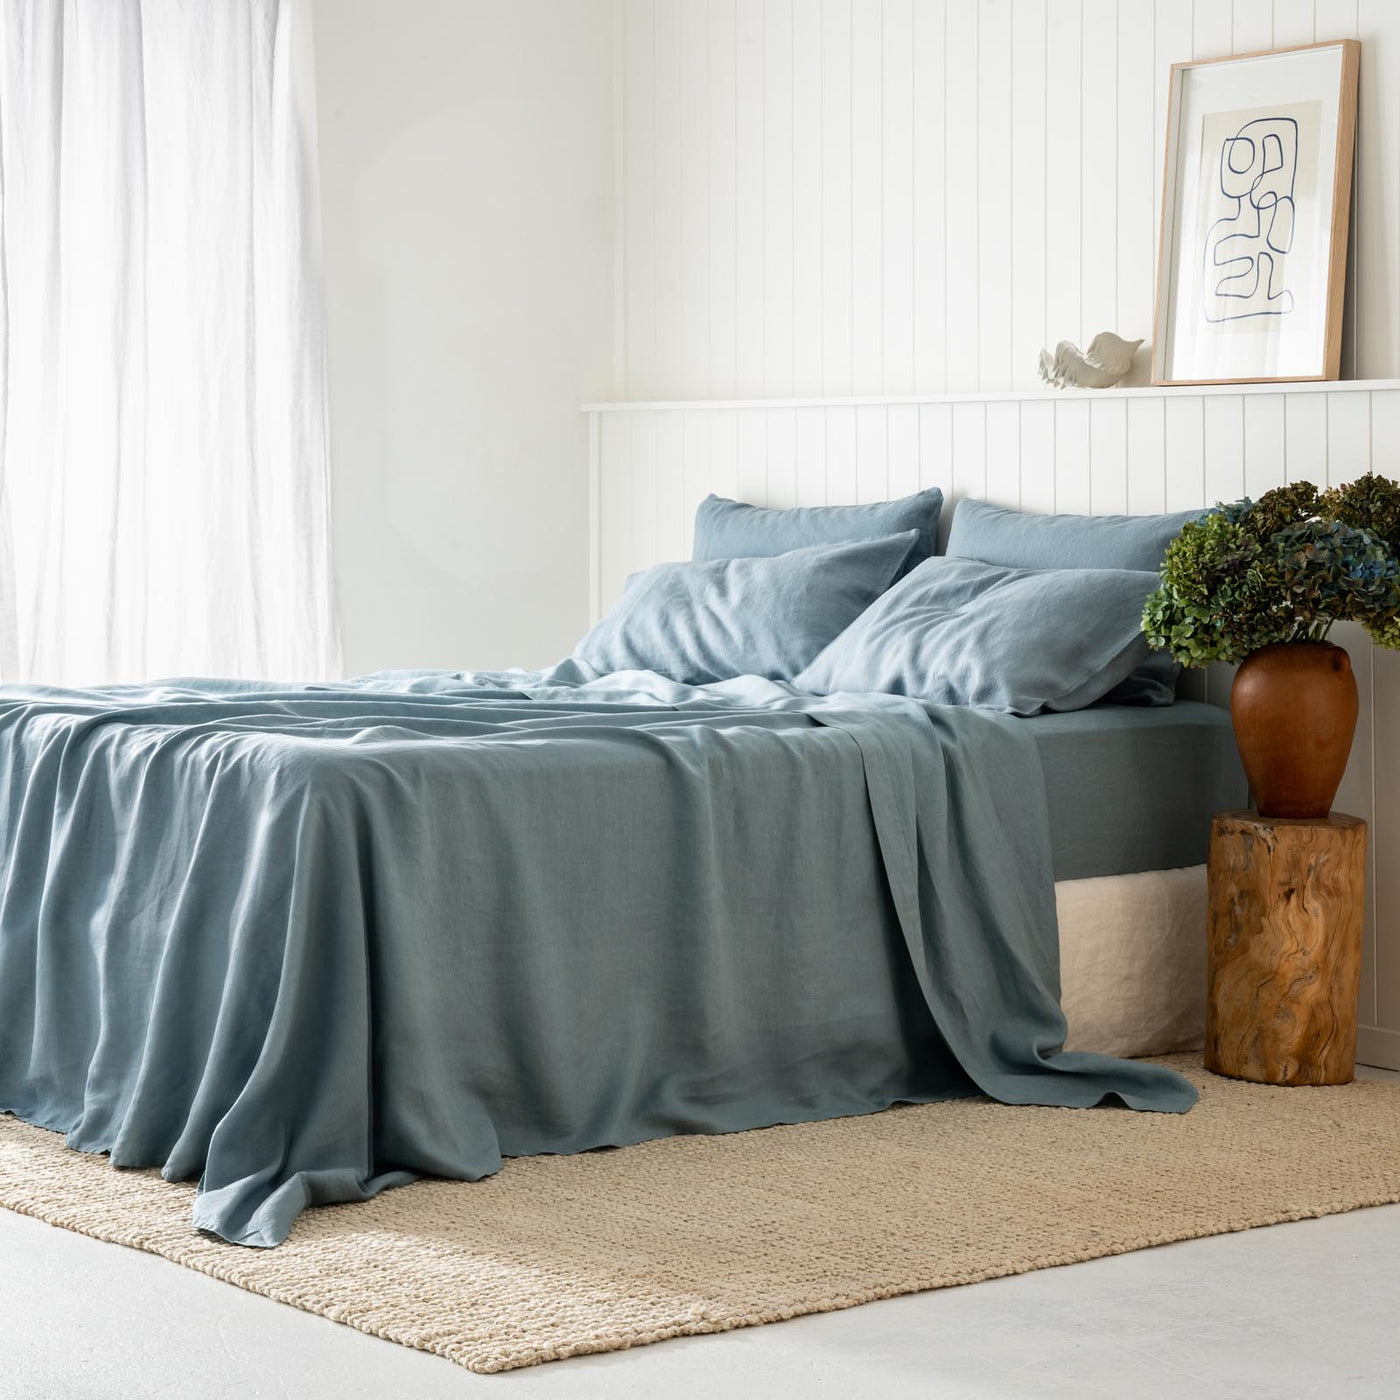 French Flax Linen Flat Sheet in Marine Blue